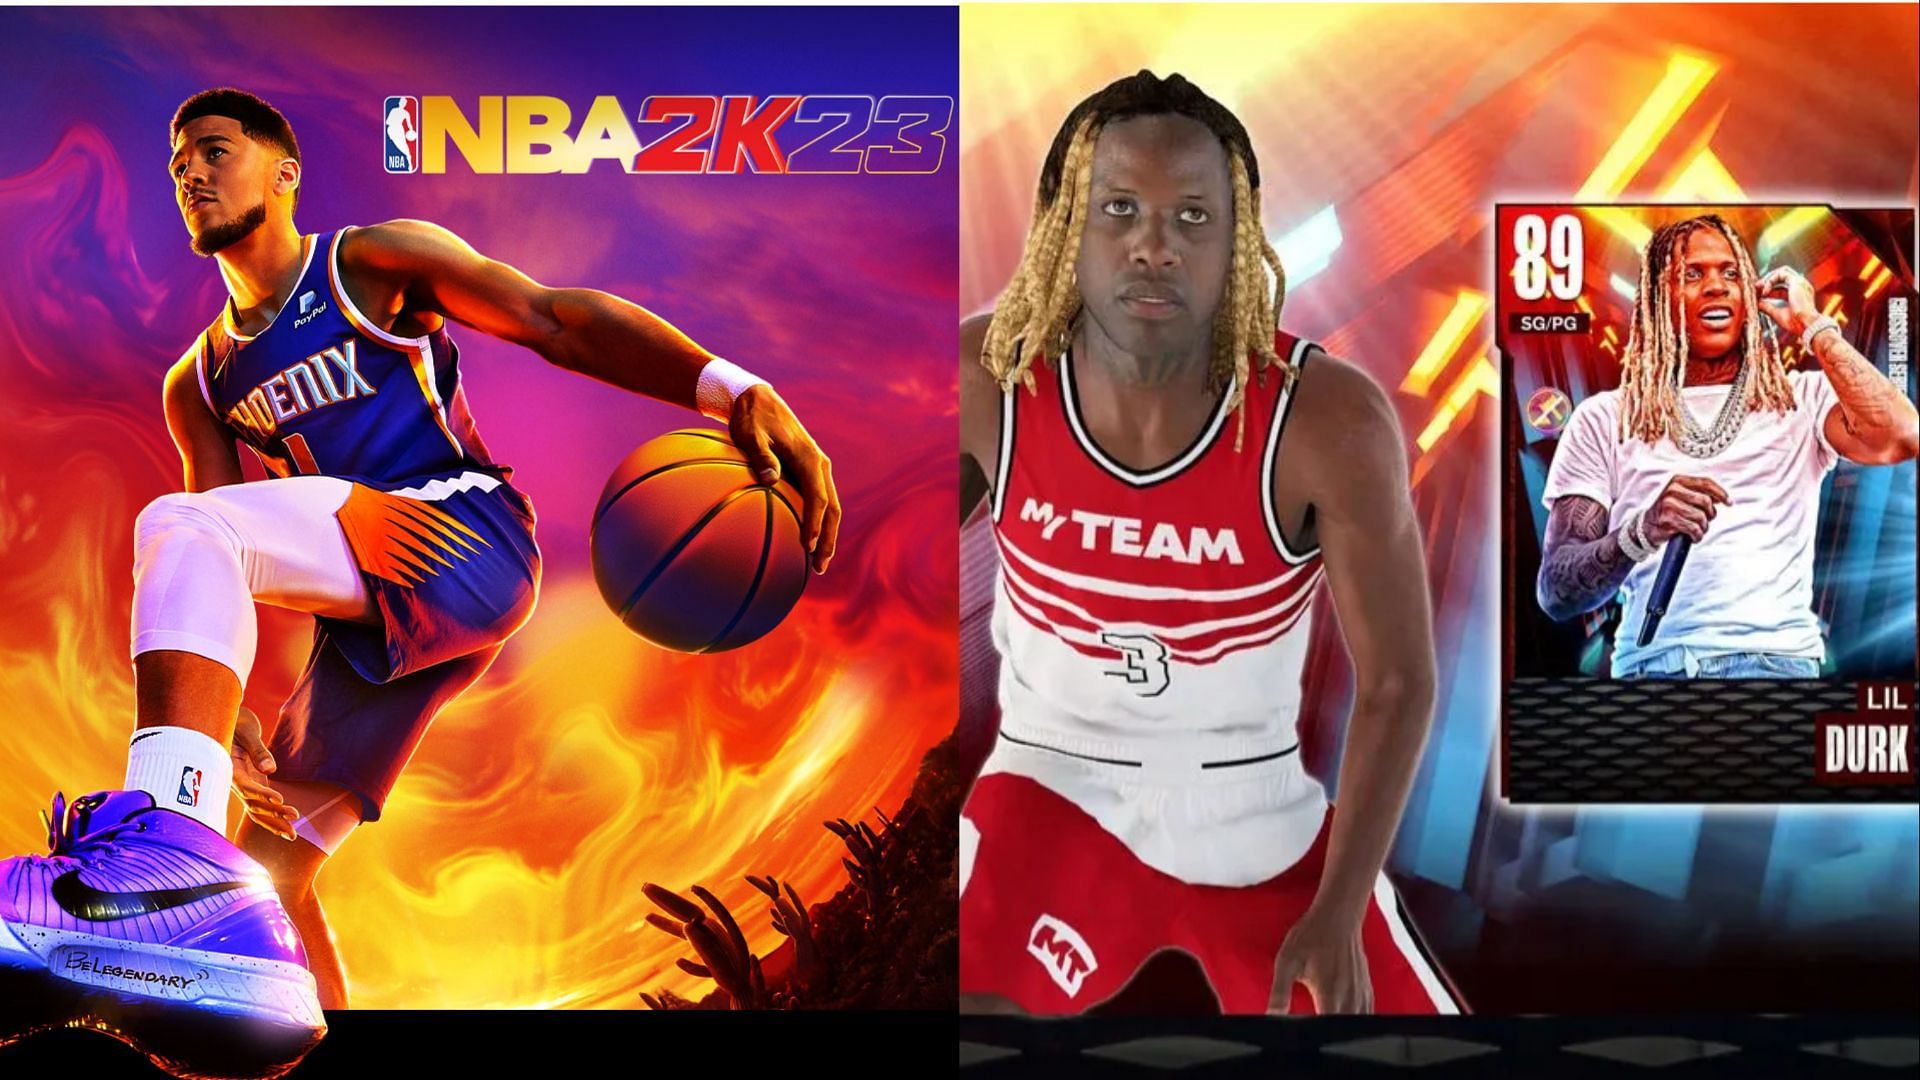 Lil Durk&rsquo;s entry as part of the Crossover Series Program in NBA 2K23 provides a great option for players (Images via 2K Sports)